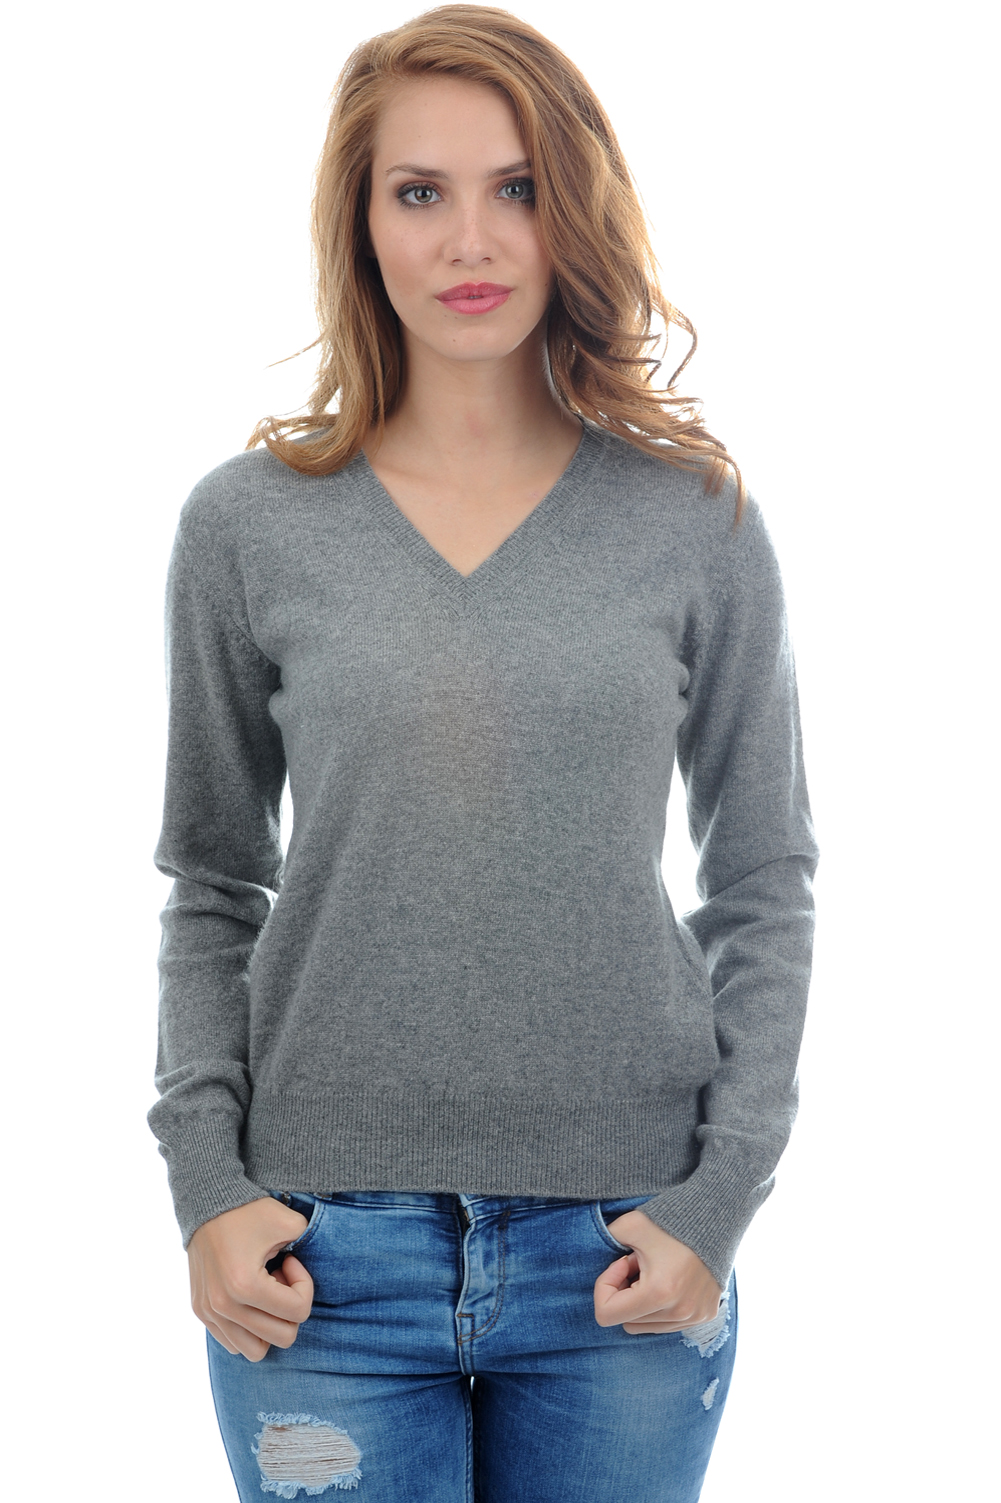 Cashmere ladies spring summer collection faustine grey marl 3xl